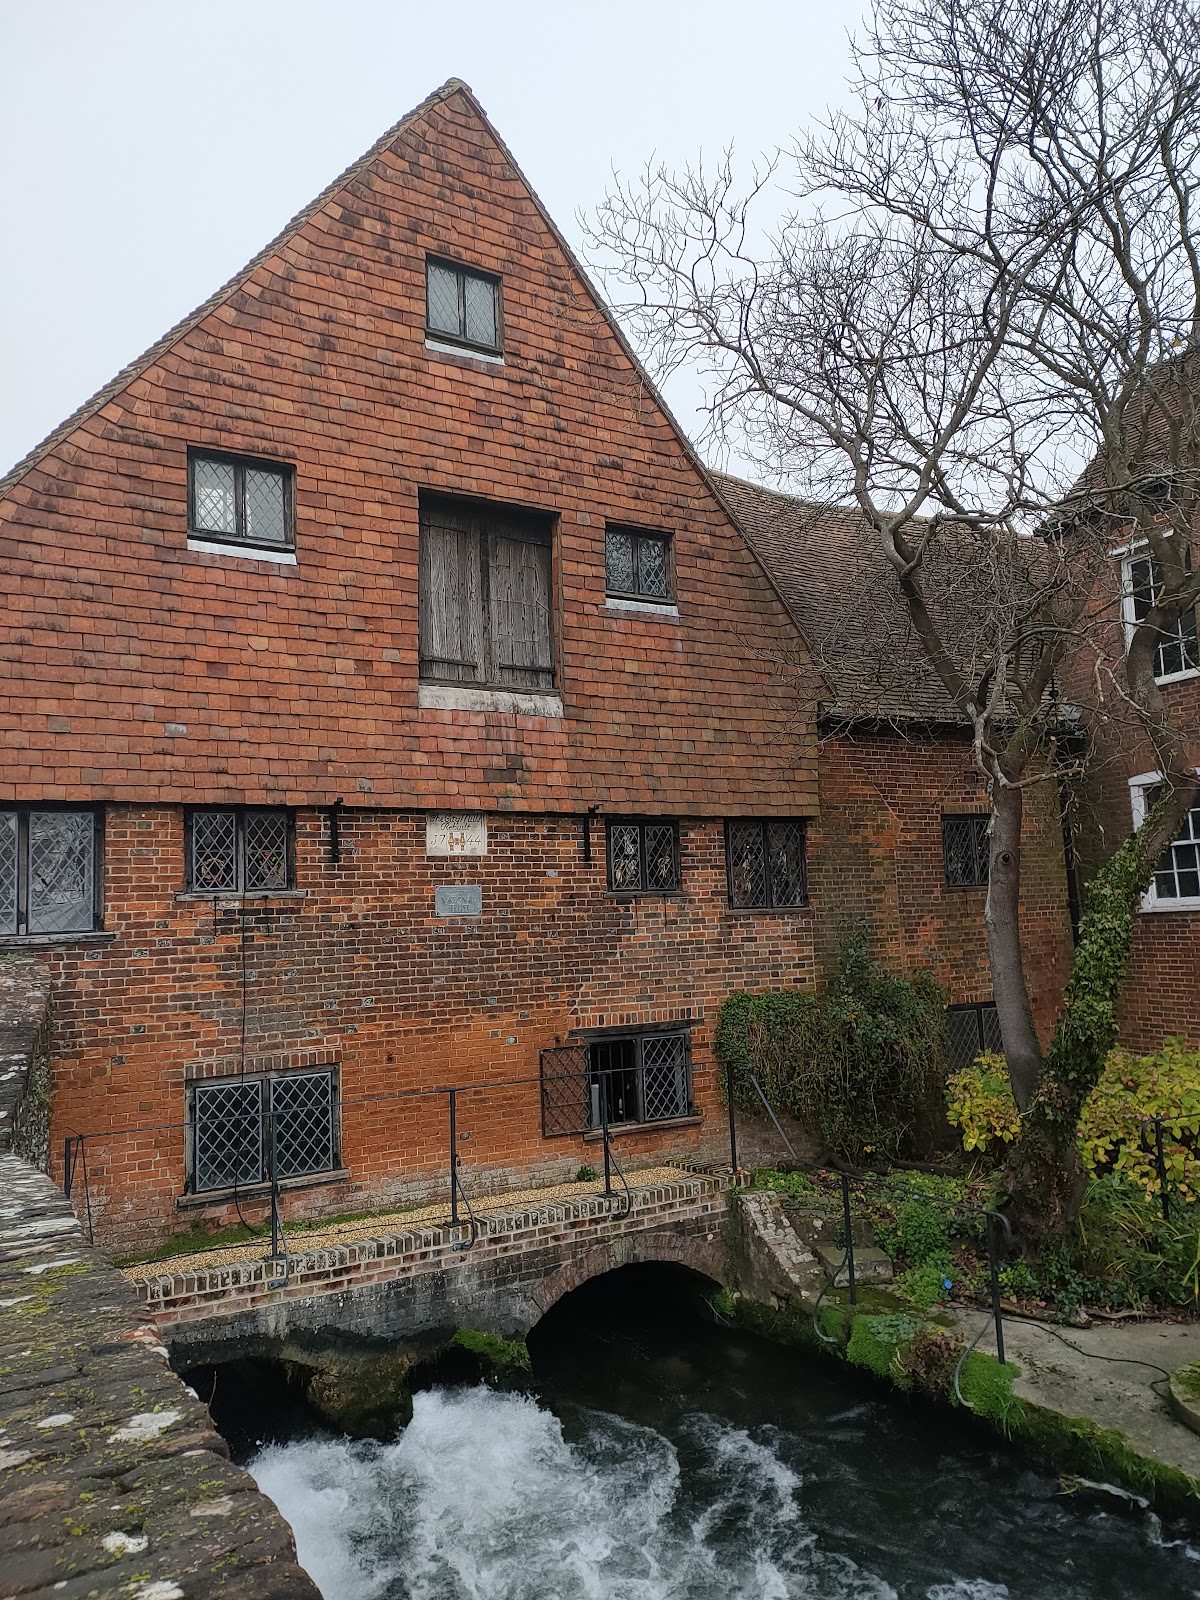 https://whatremovals.co.uk/wp-content/uploads/2022/02/National Trust - Winchester City Mill-225x300.jpeg